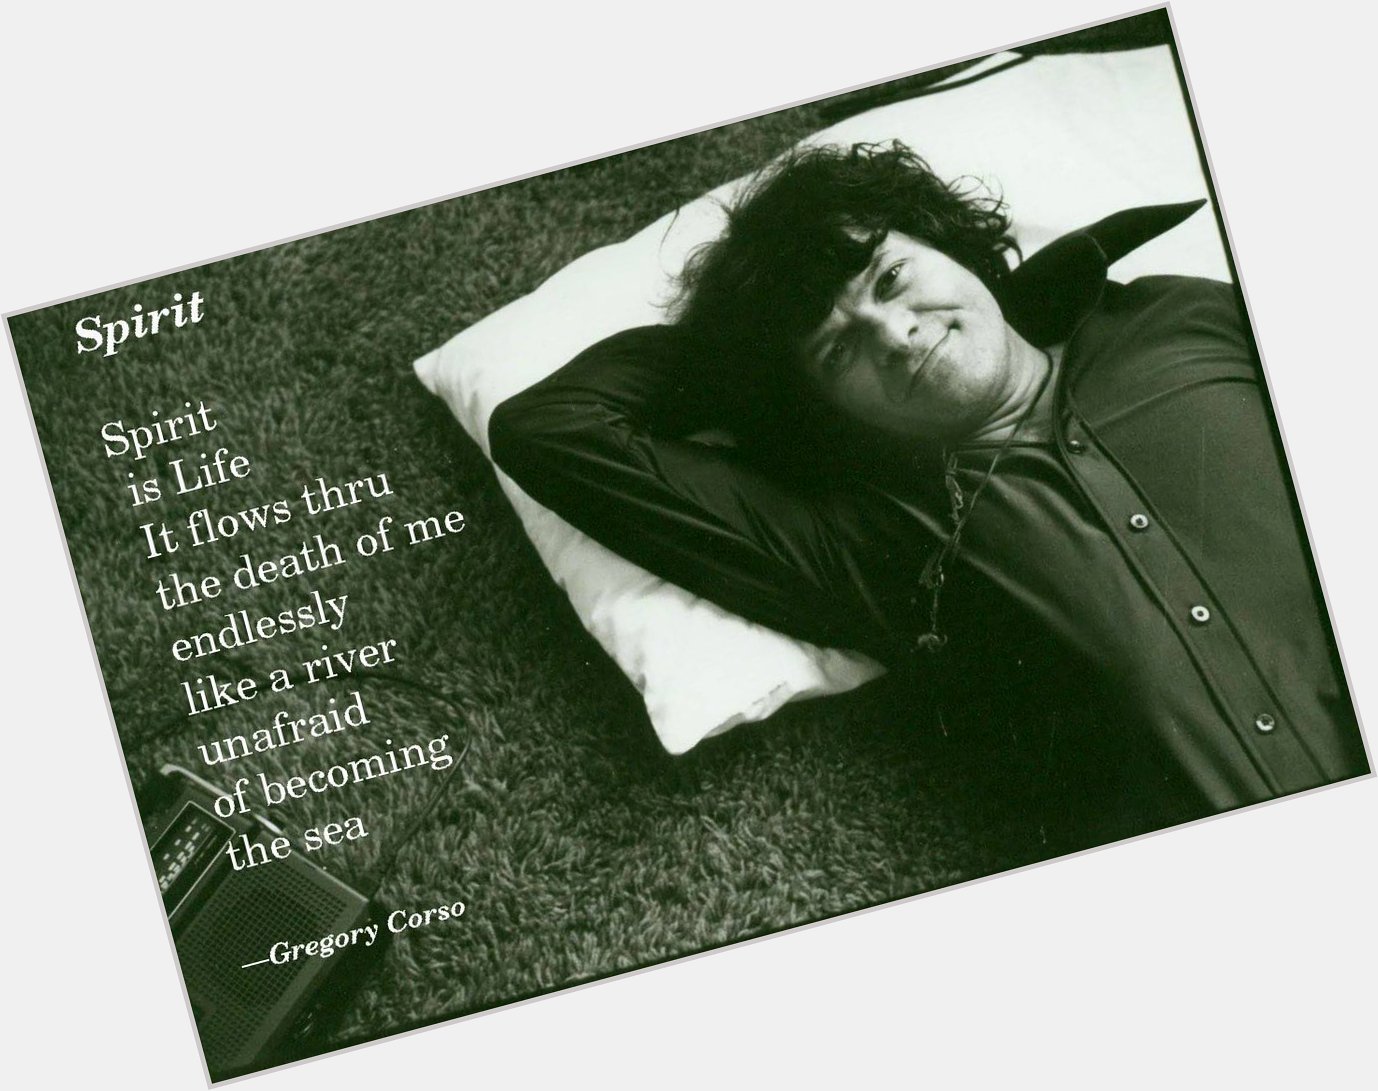 Happy Birthday Gregory Corso! This poem marks his resting place. 